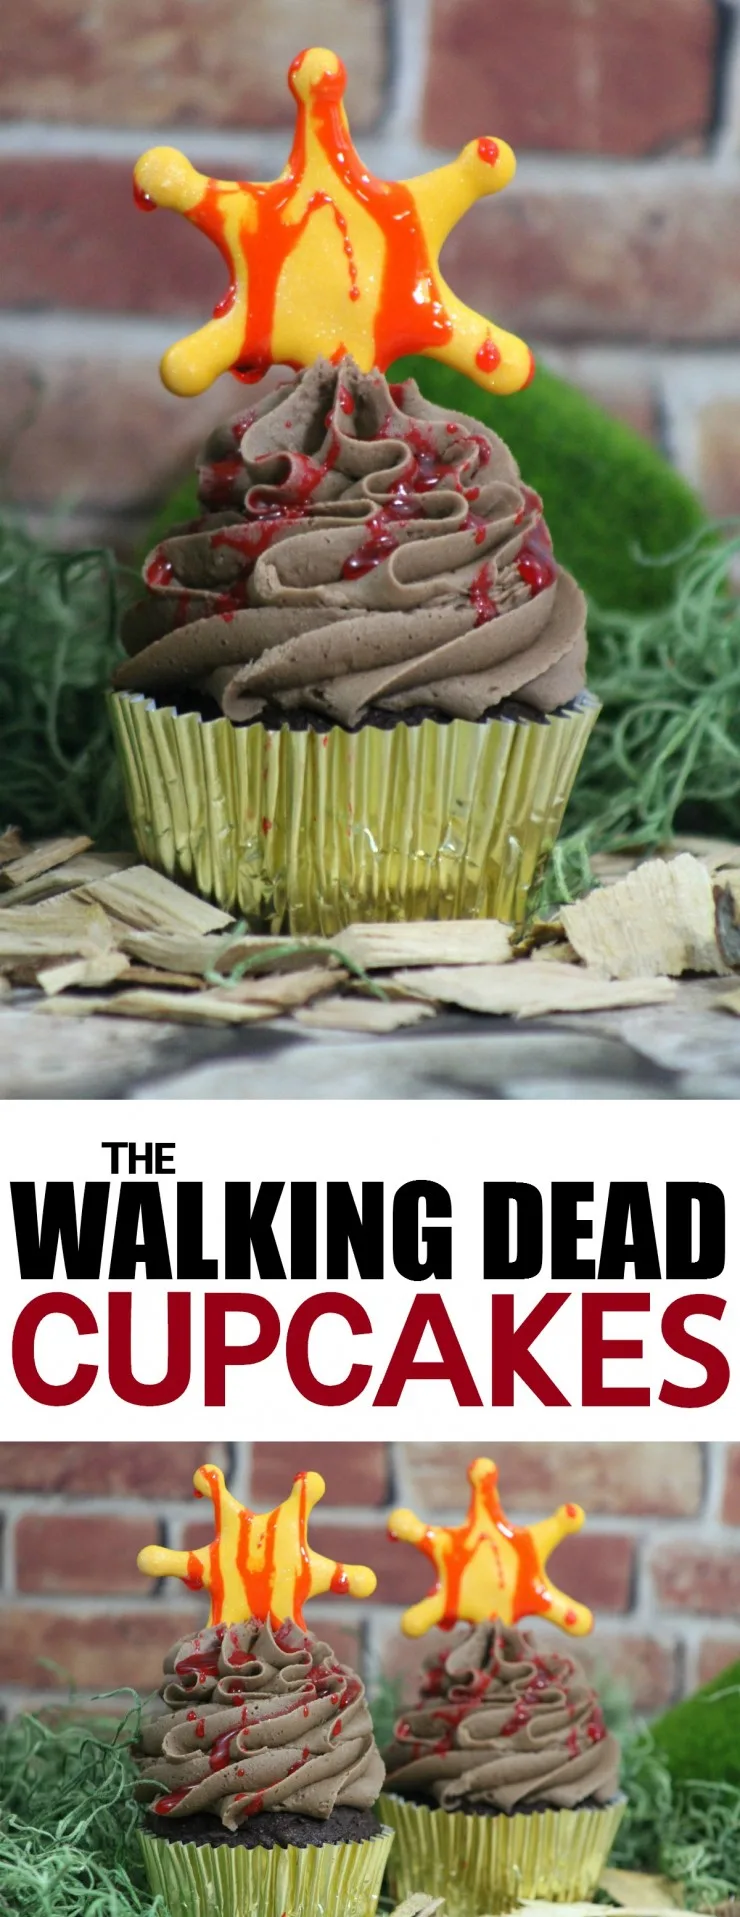 For fans of AMC's The Walking Dead these The Walking Dead Cupcakes are a great way to celebrate the upcoming season featuring Rick Grime's Sheriff Badge.